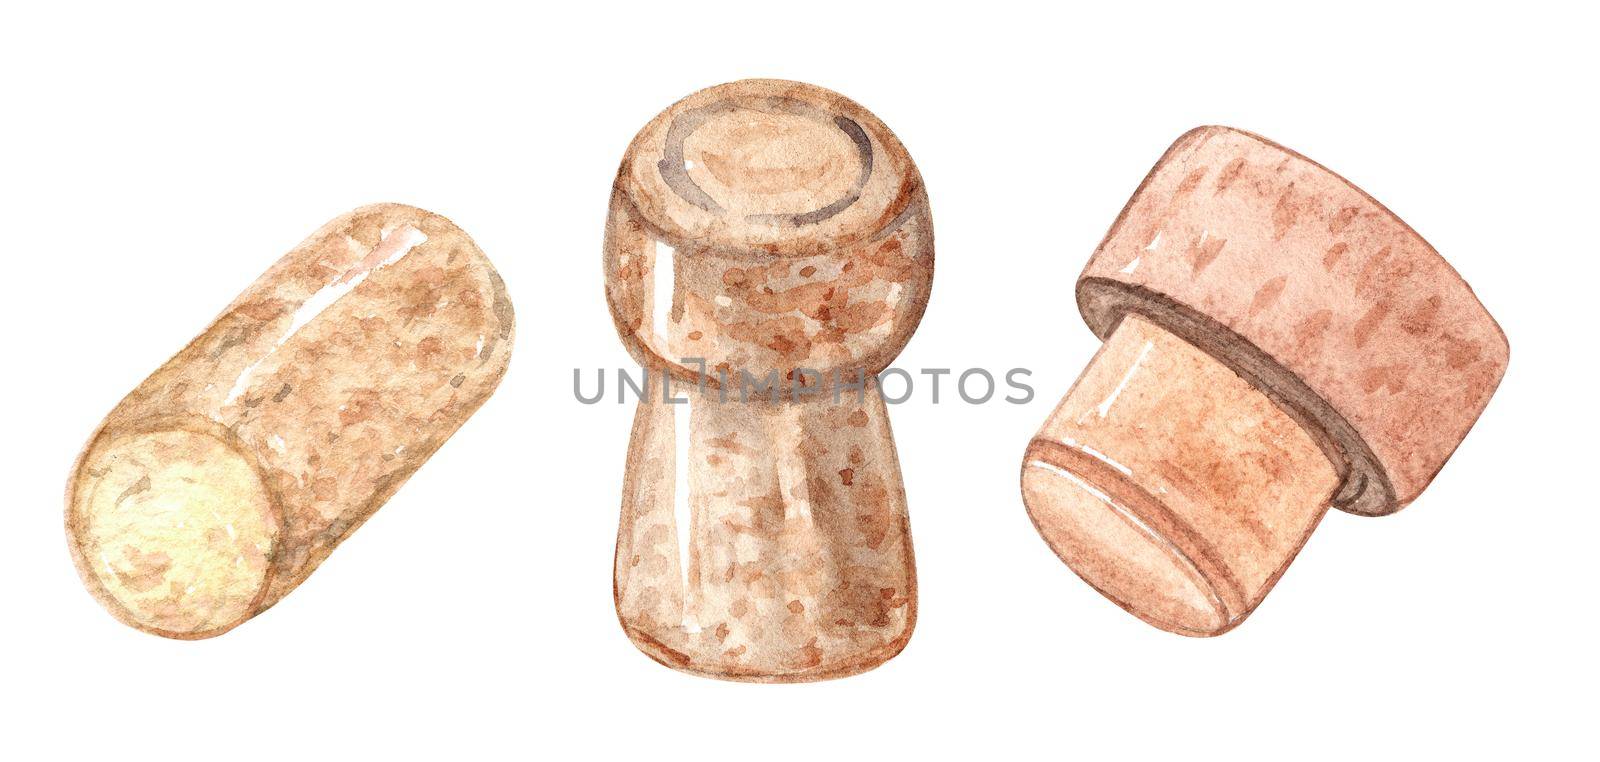 Watercolor cork stoppers set isolated on white background. Wine caps hand drawn illustration